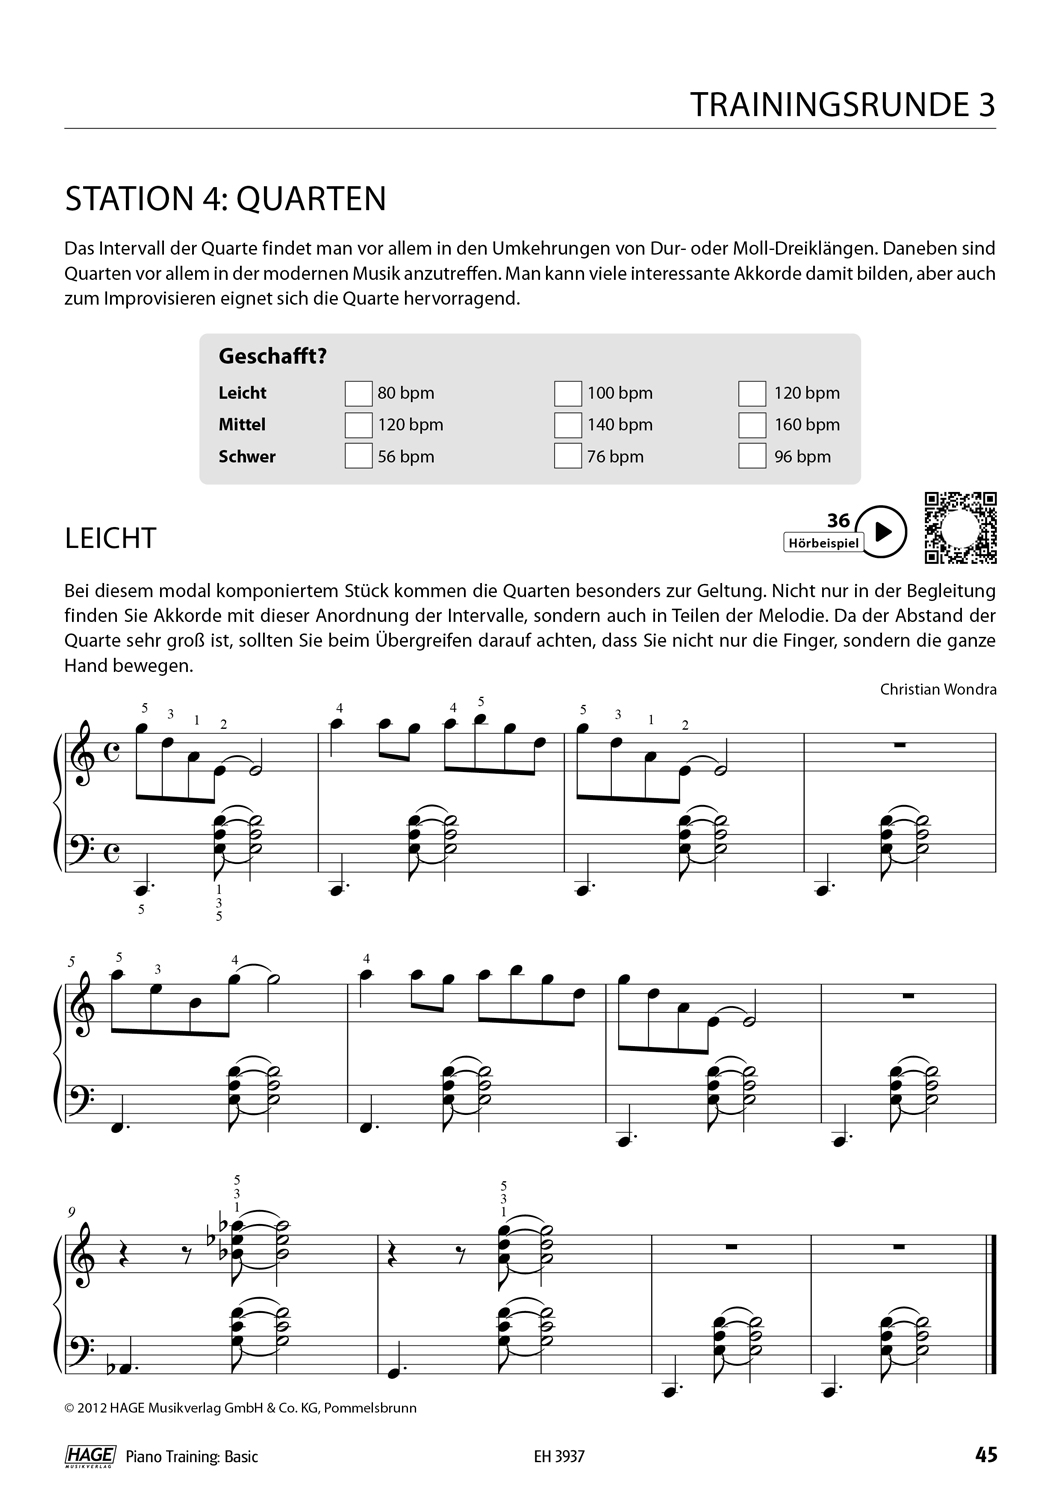 Piano Training Basic Pages 11